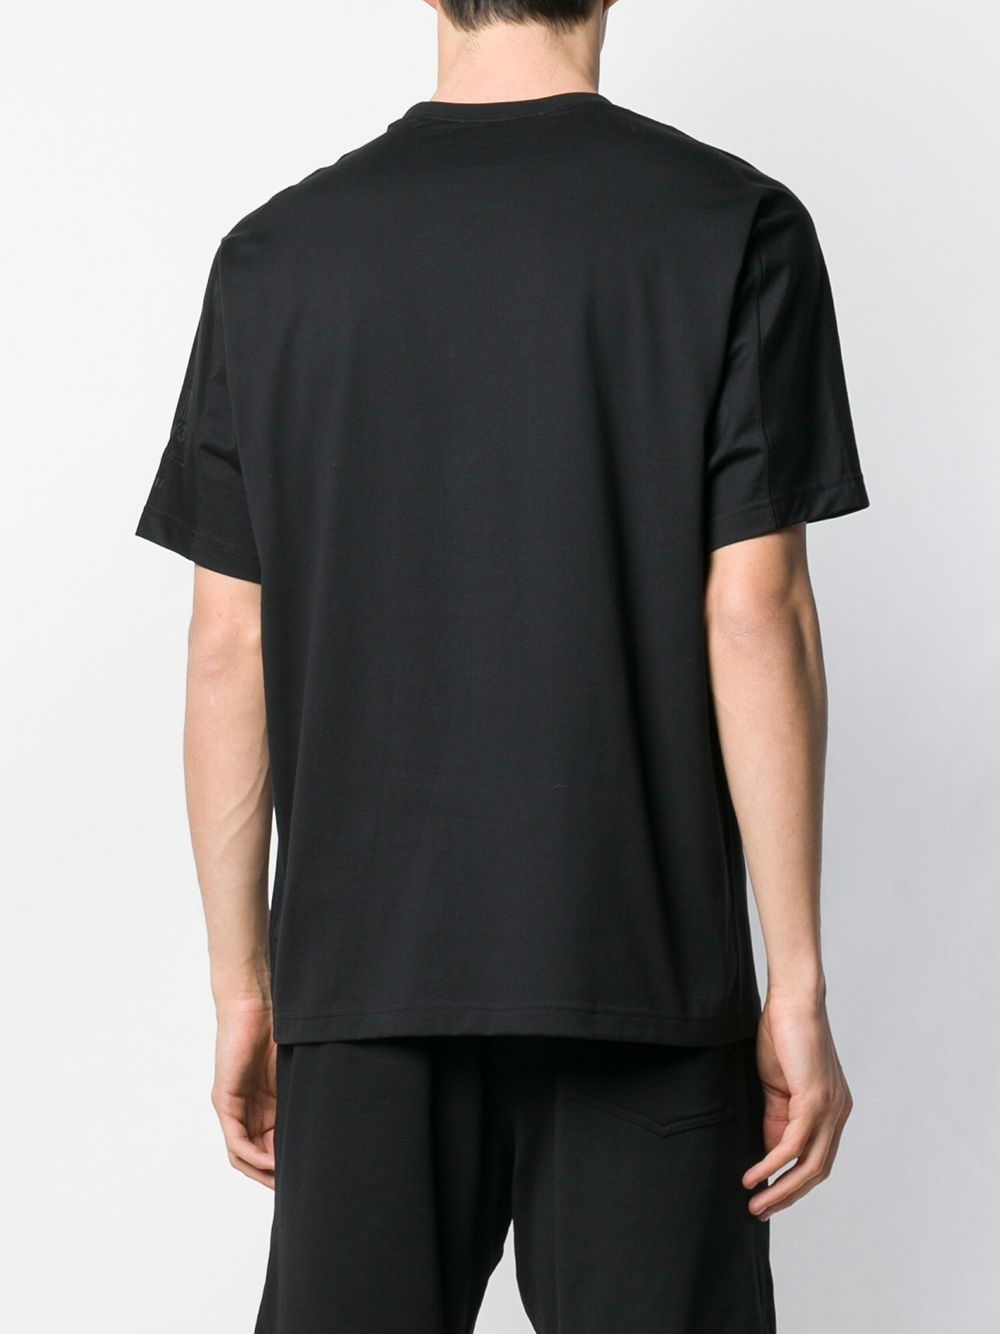 y-3 T-SHIRT available on montiboutique.com - 27137